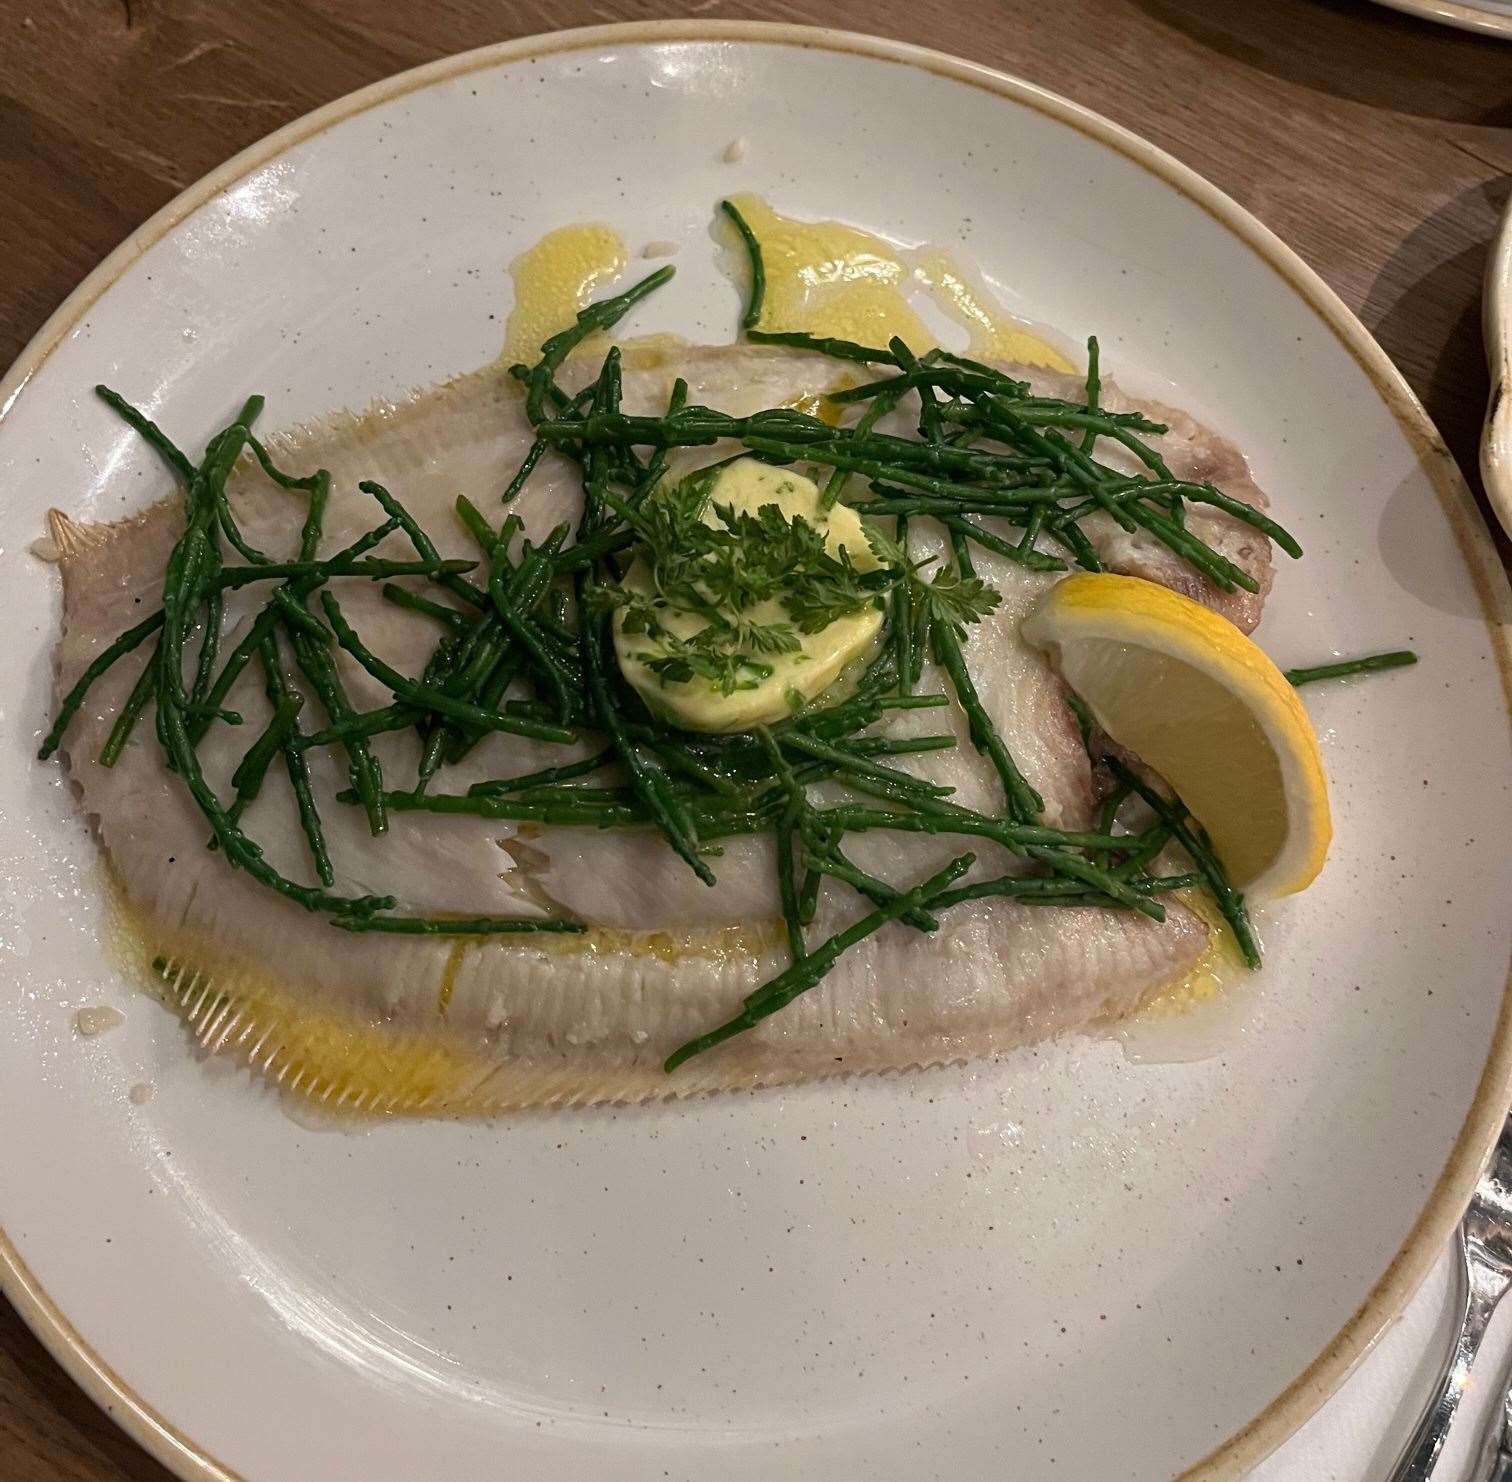 The whole grilled lemon sole served with seaweed butter, samphire and buttered Nichola potatoes